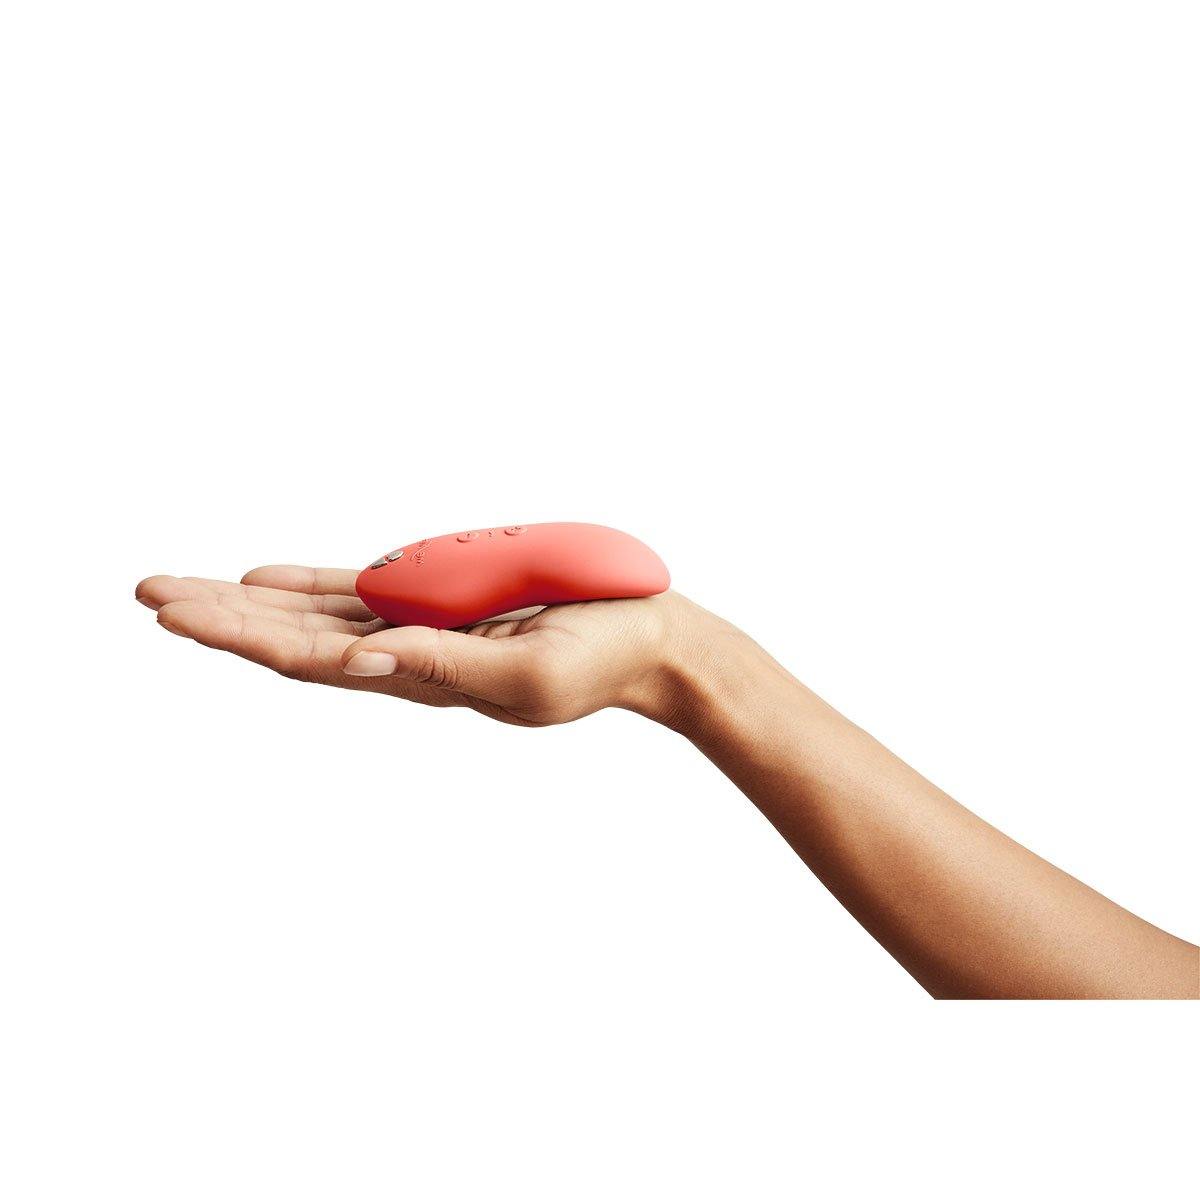 We-Vibe Touch X Coral - Buy At Luxury Toy X - Free 3-Day Shipping